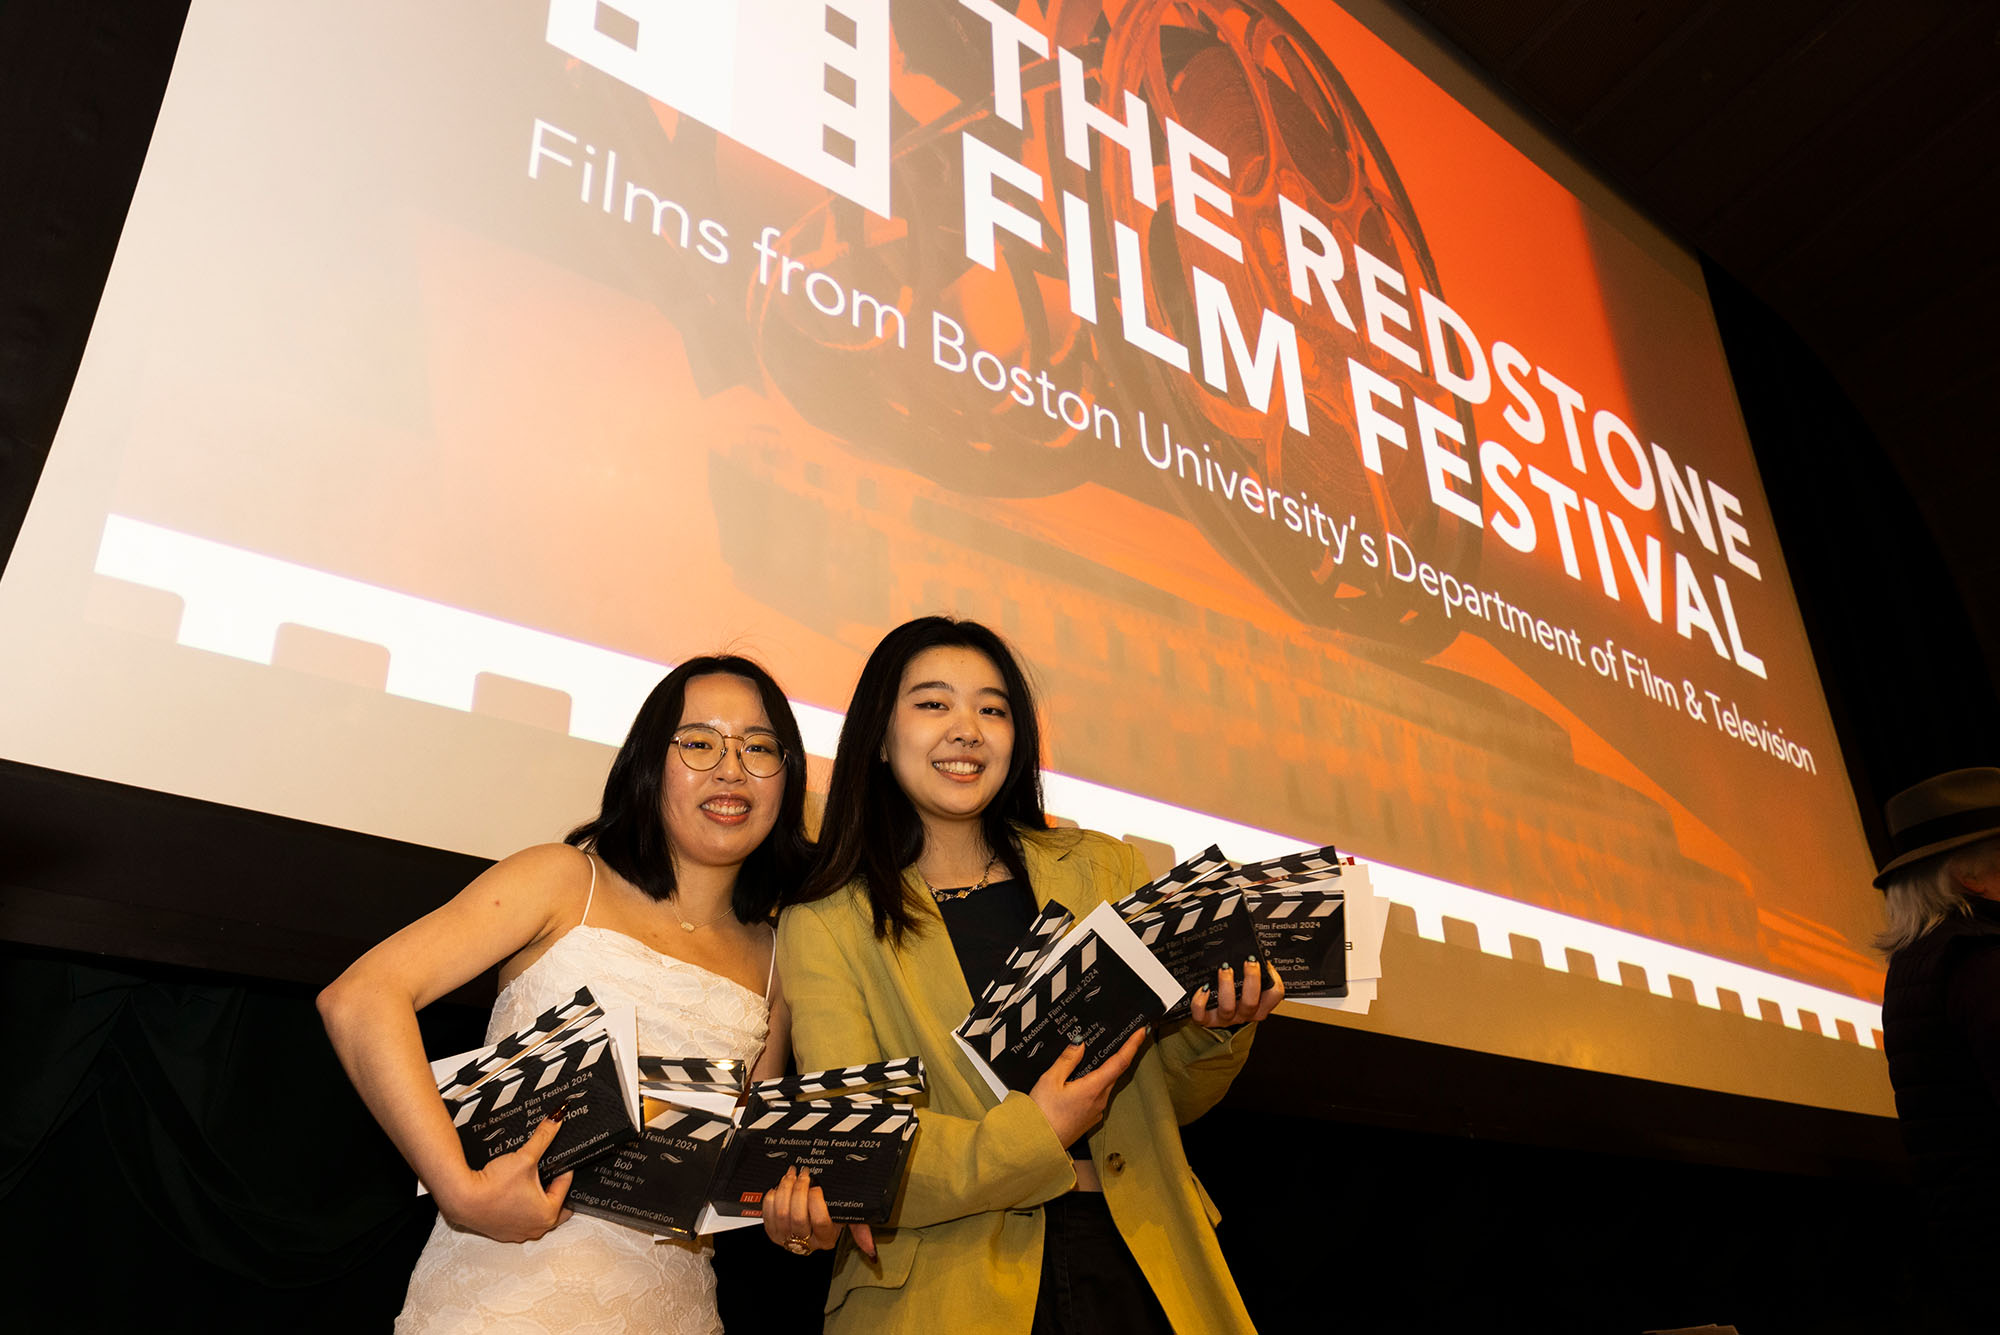 Photo: Photo of two girls in front of a projector screen holding a clapperboard-shaped film award.